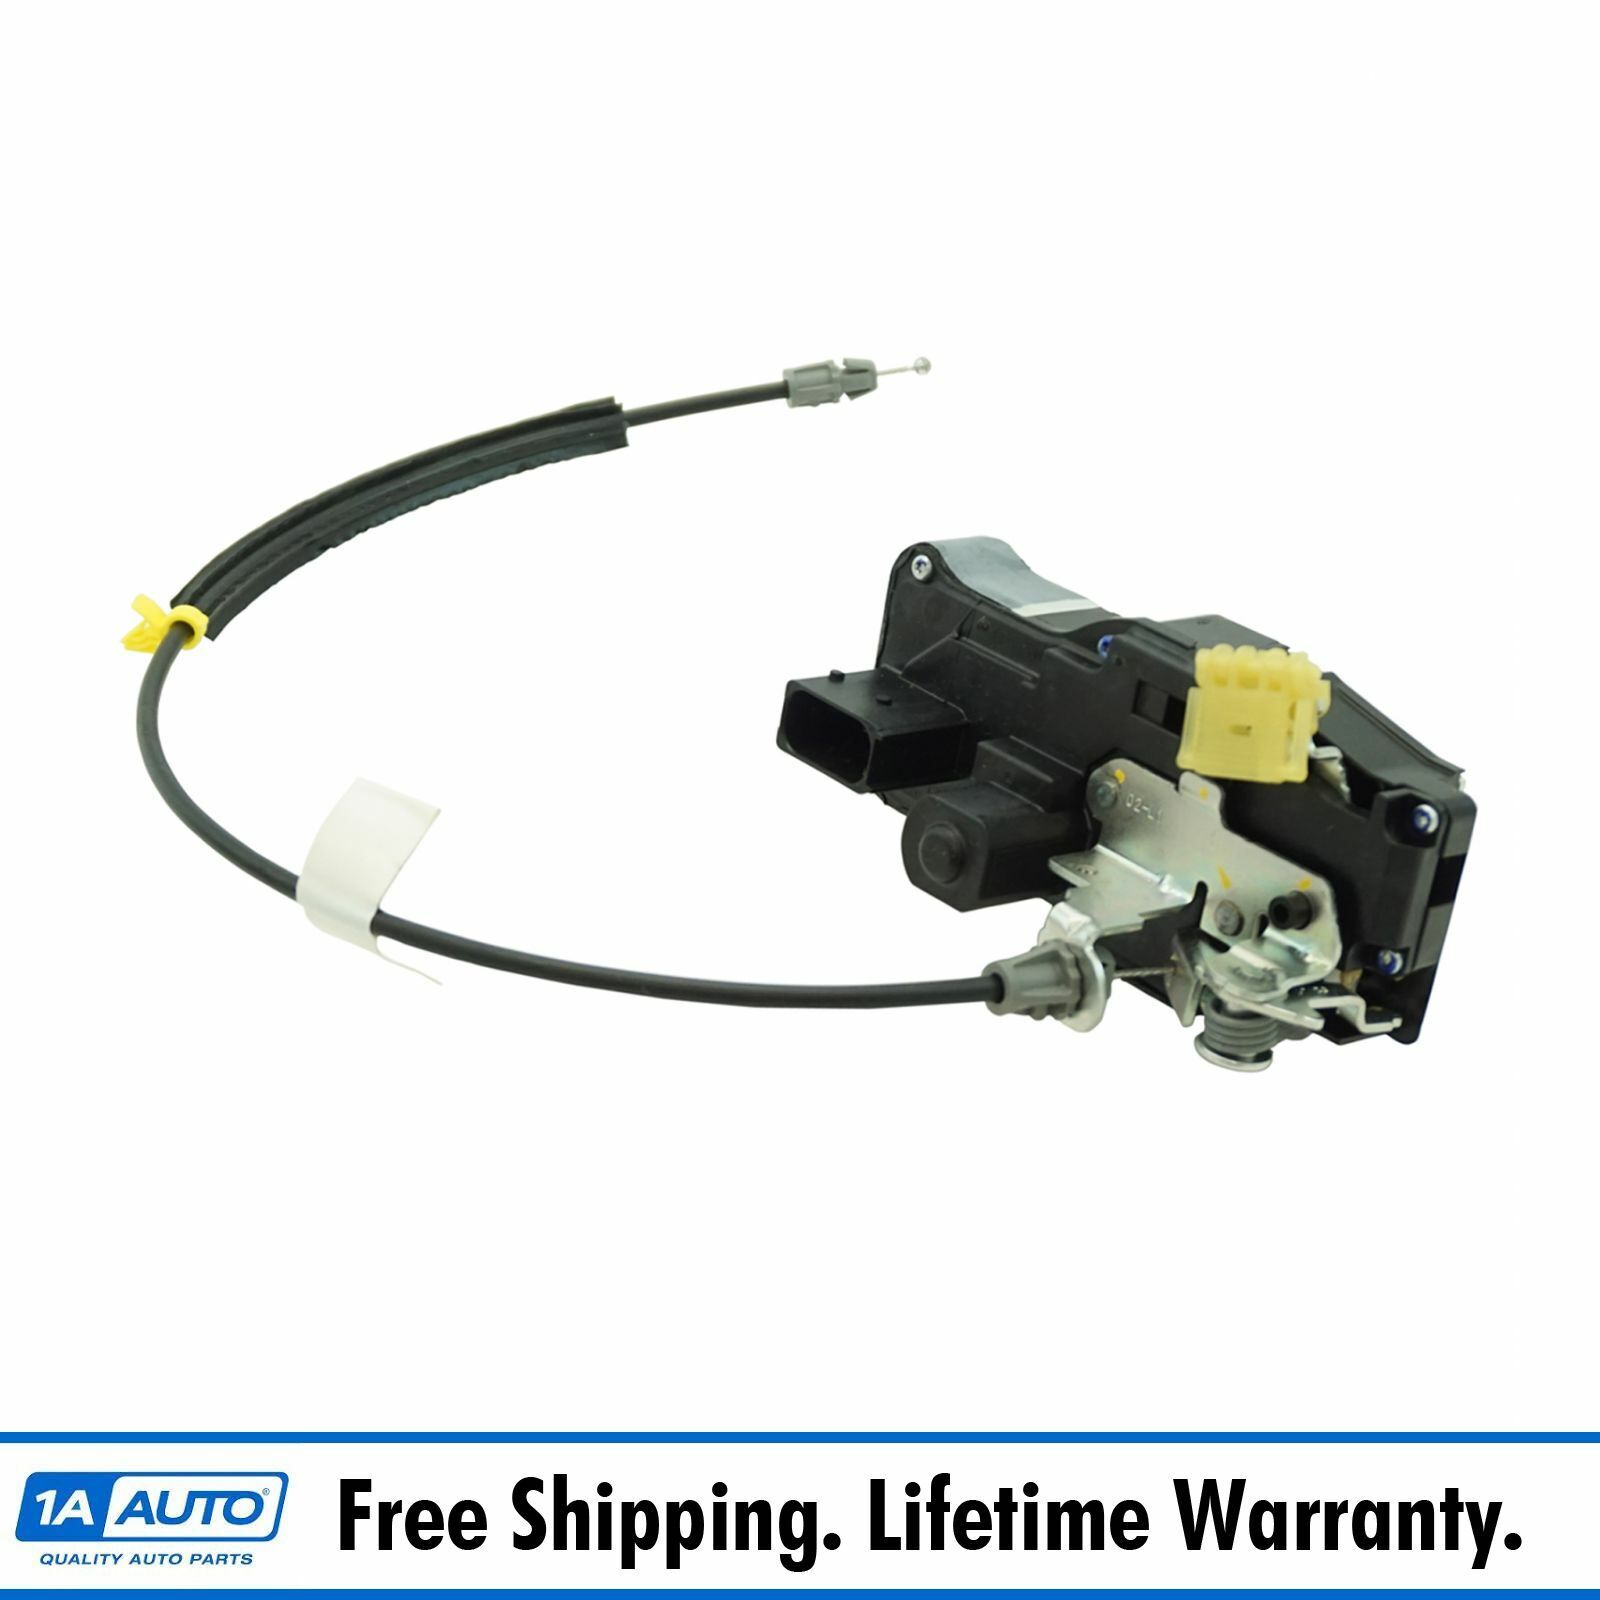 OEM Power Door Lock Actuator w/ Integrated Latch & Cable for Cadillac CTS CTS-V